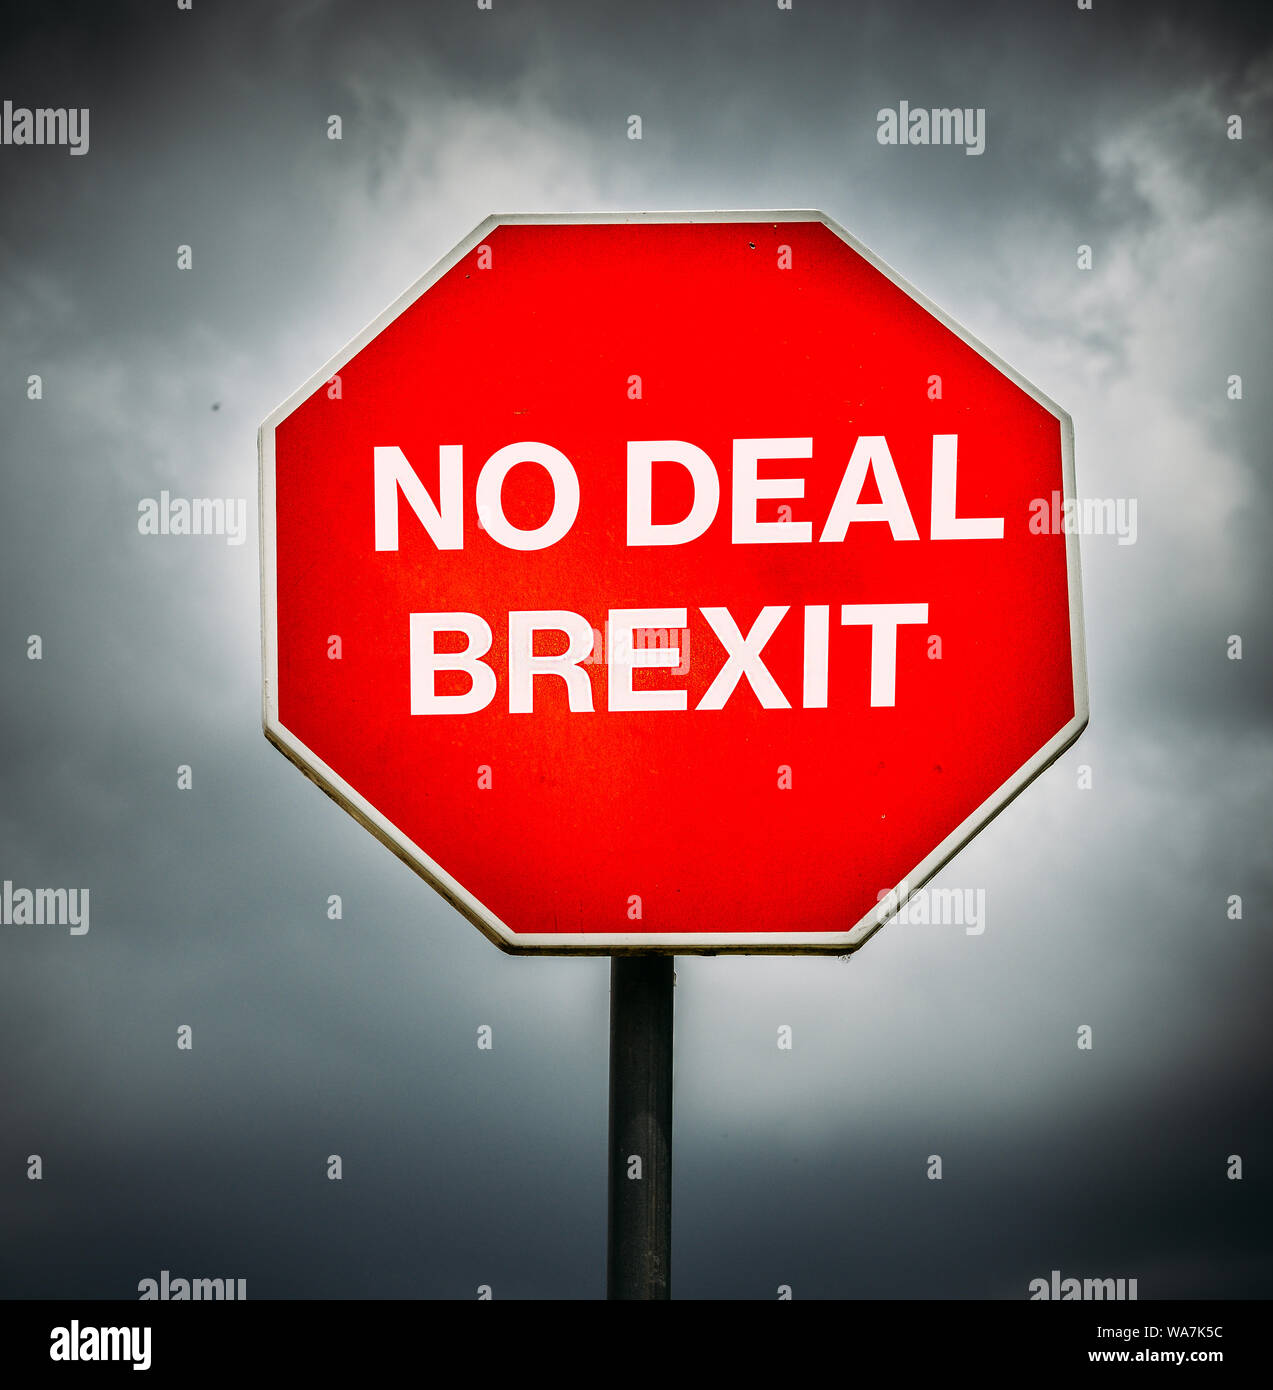 No Deal Brexit written on octagon stop sign with storm clouds in background. Stock Photo